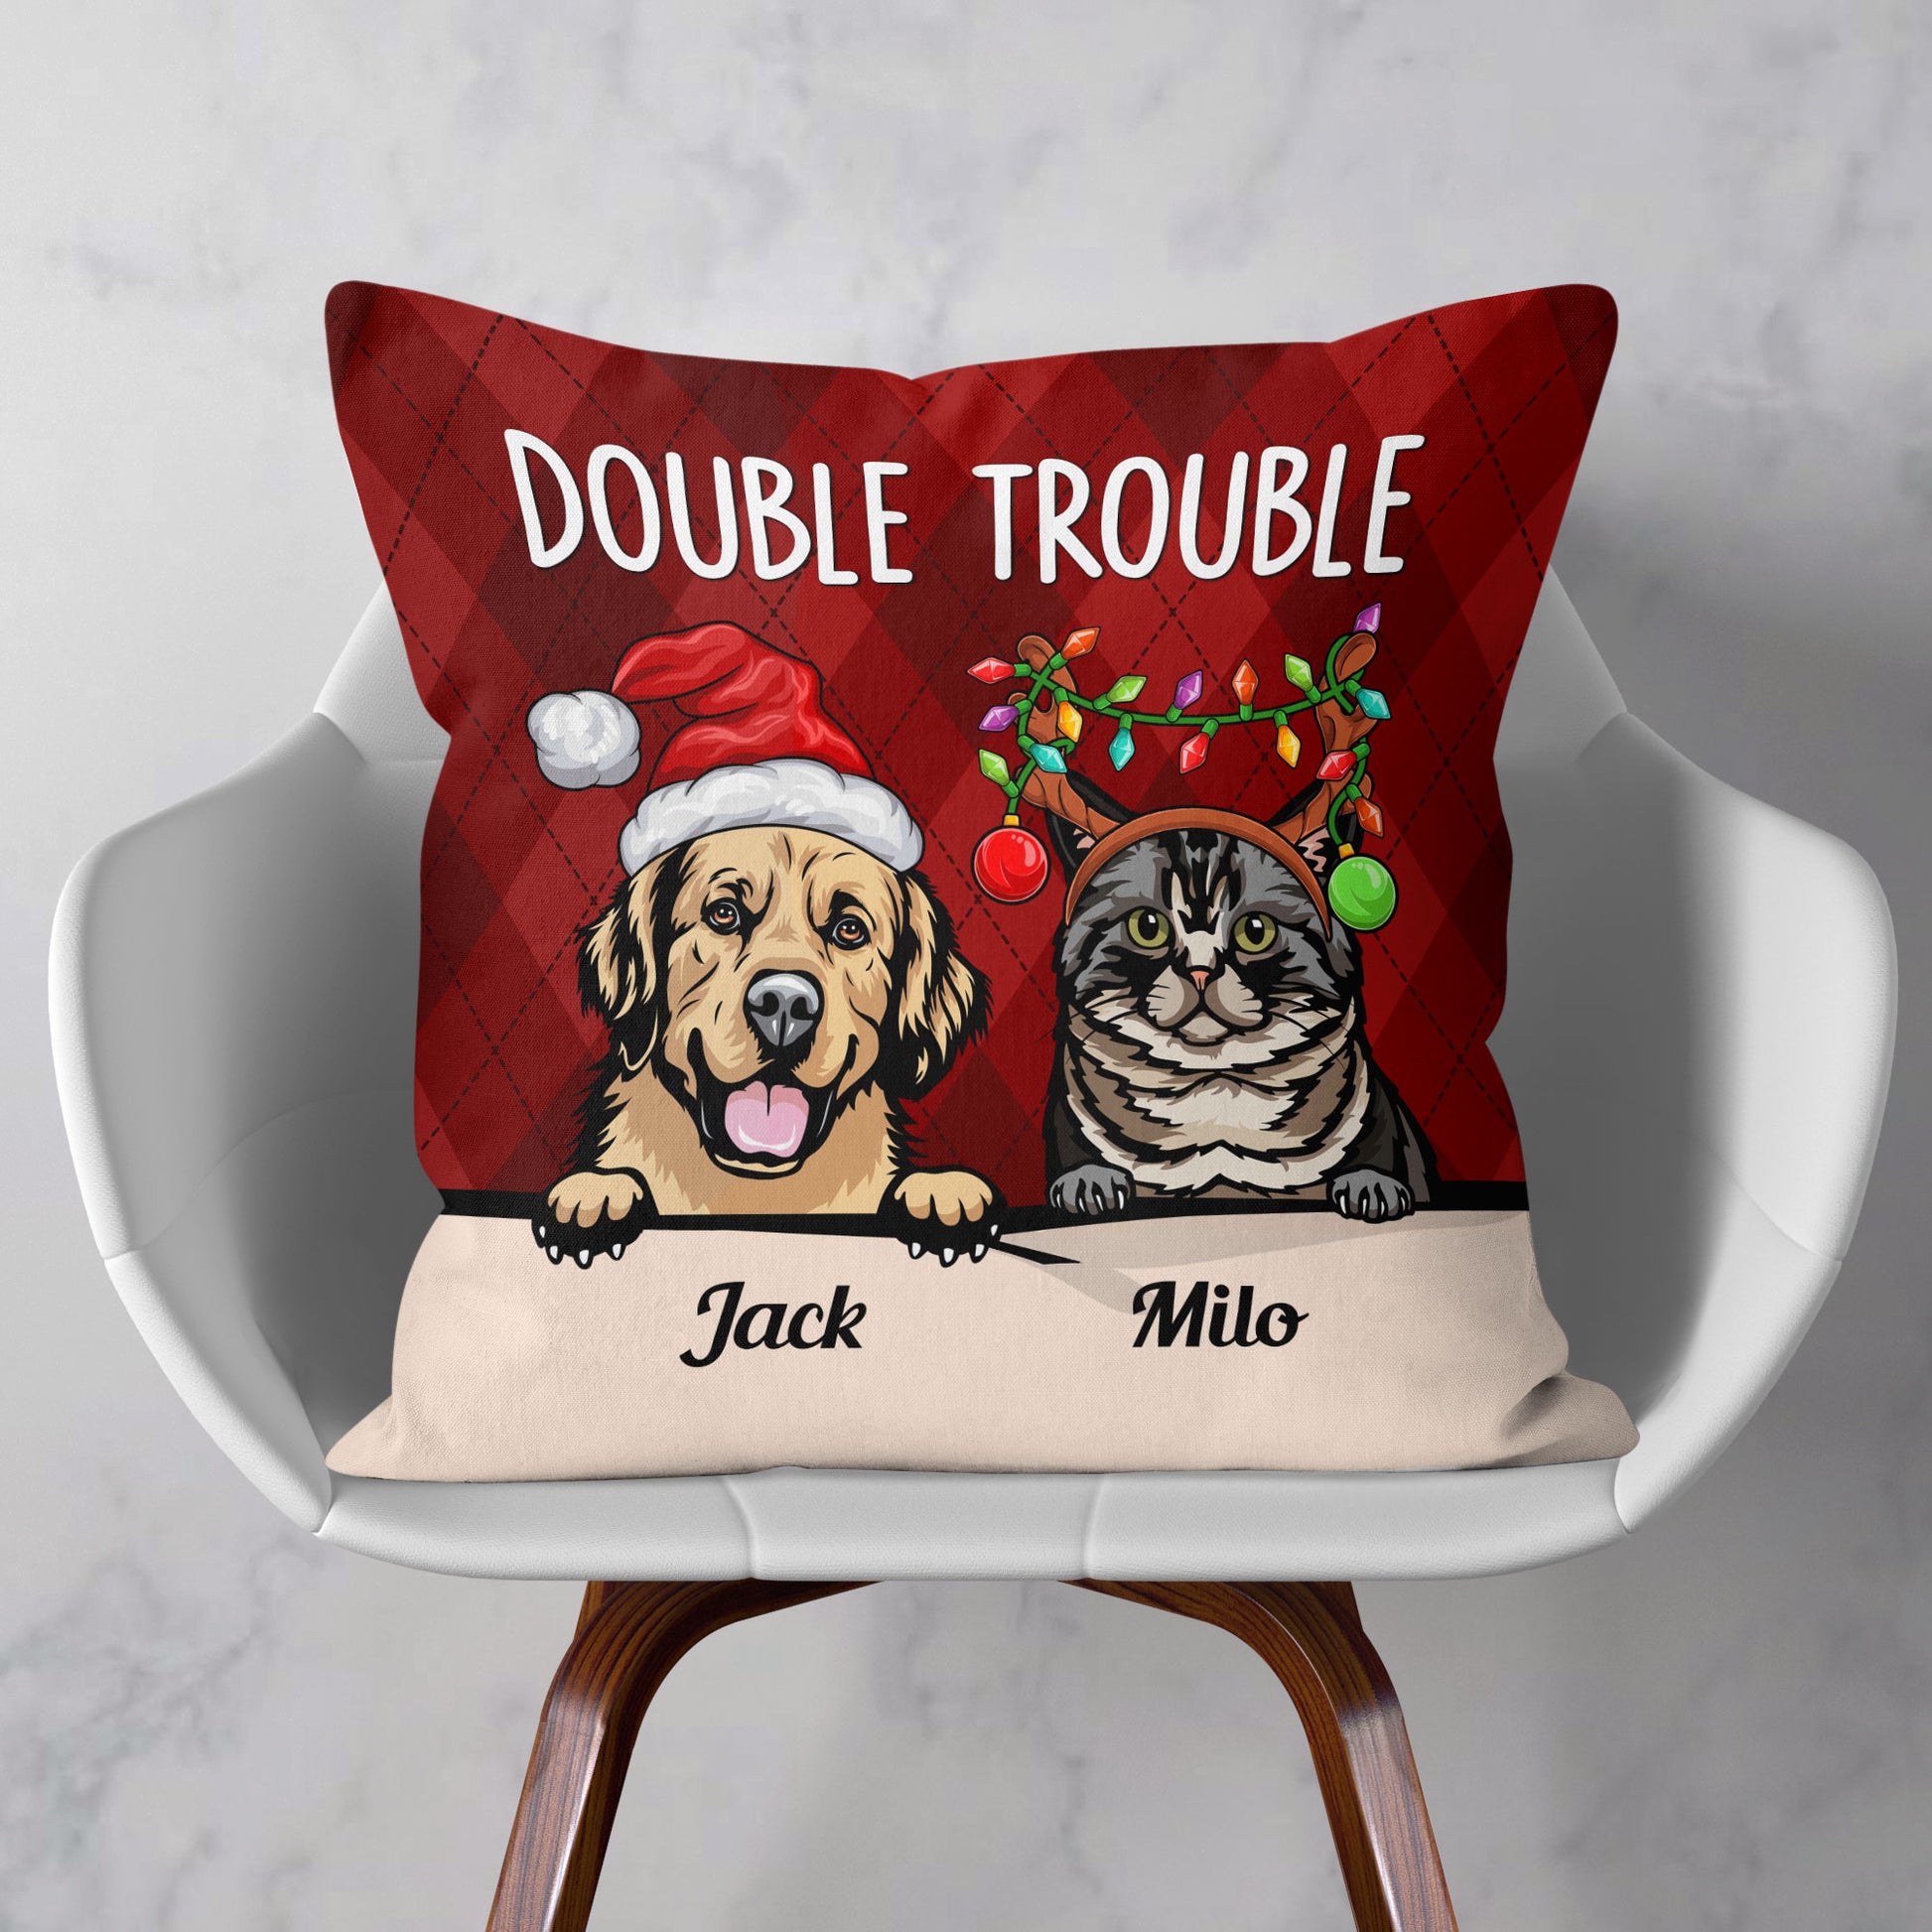 Double Trouble - Personalized Pillow - Christmas Gift For Cat & Dog Lover, Pet Owner, Pet Parents